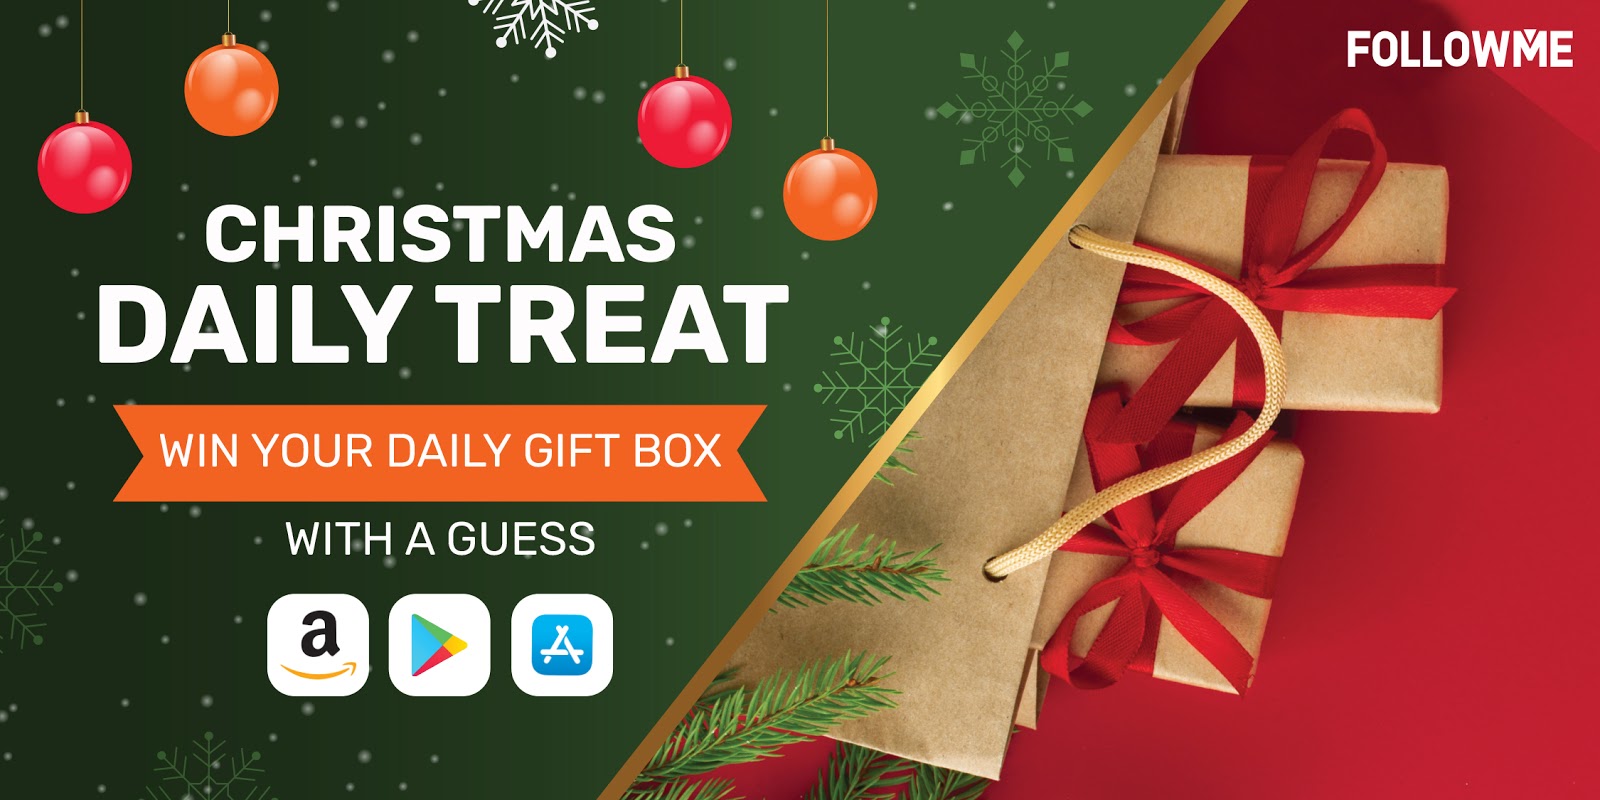 FOLLOWME Christmas Daily Treat - COMMENT & WIN!